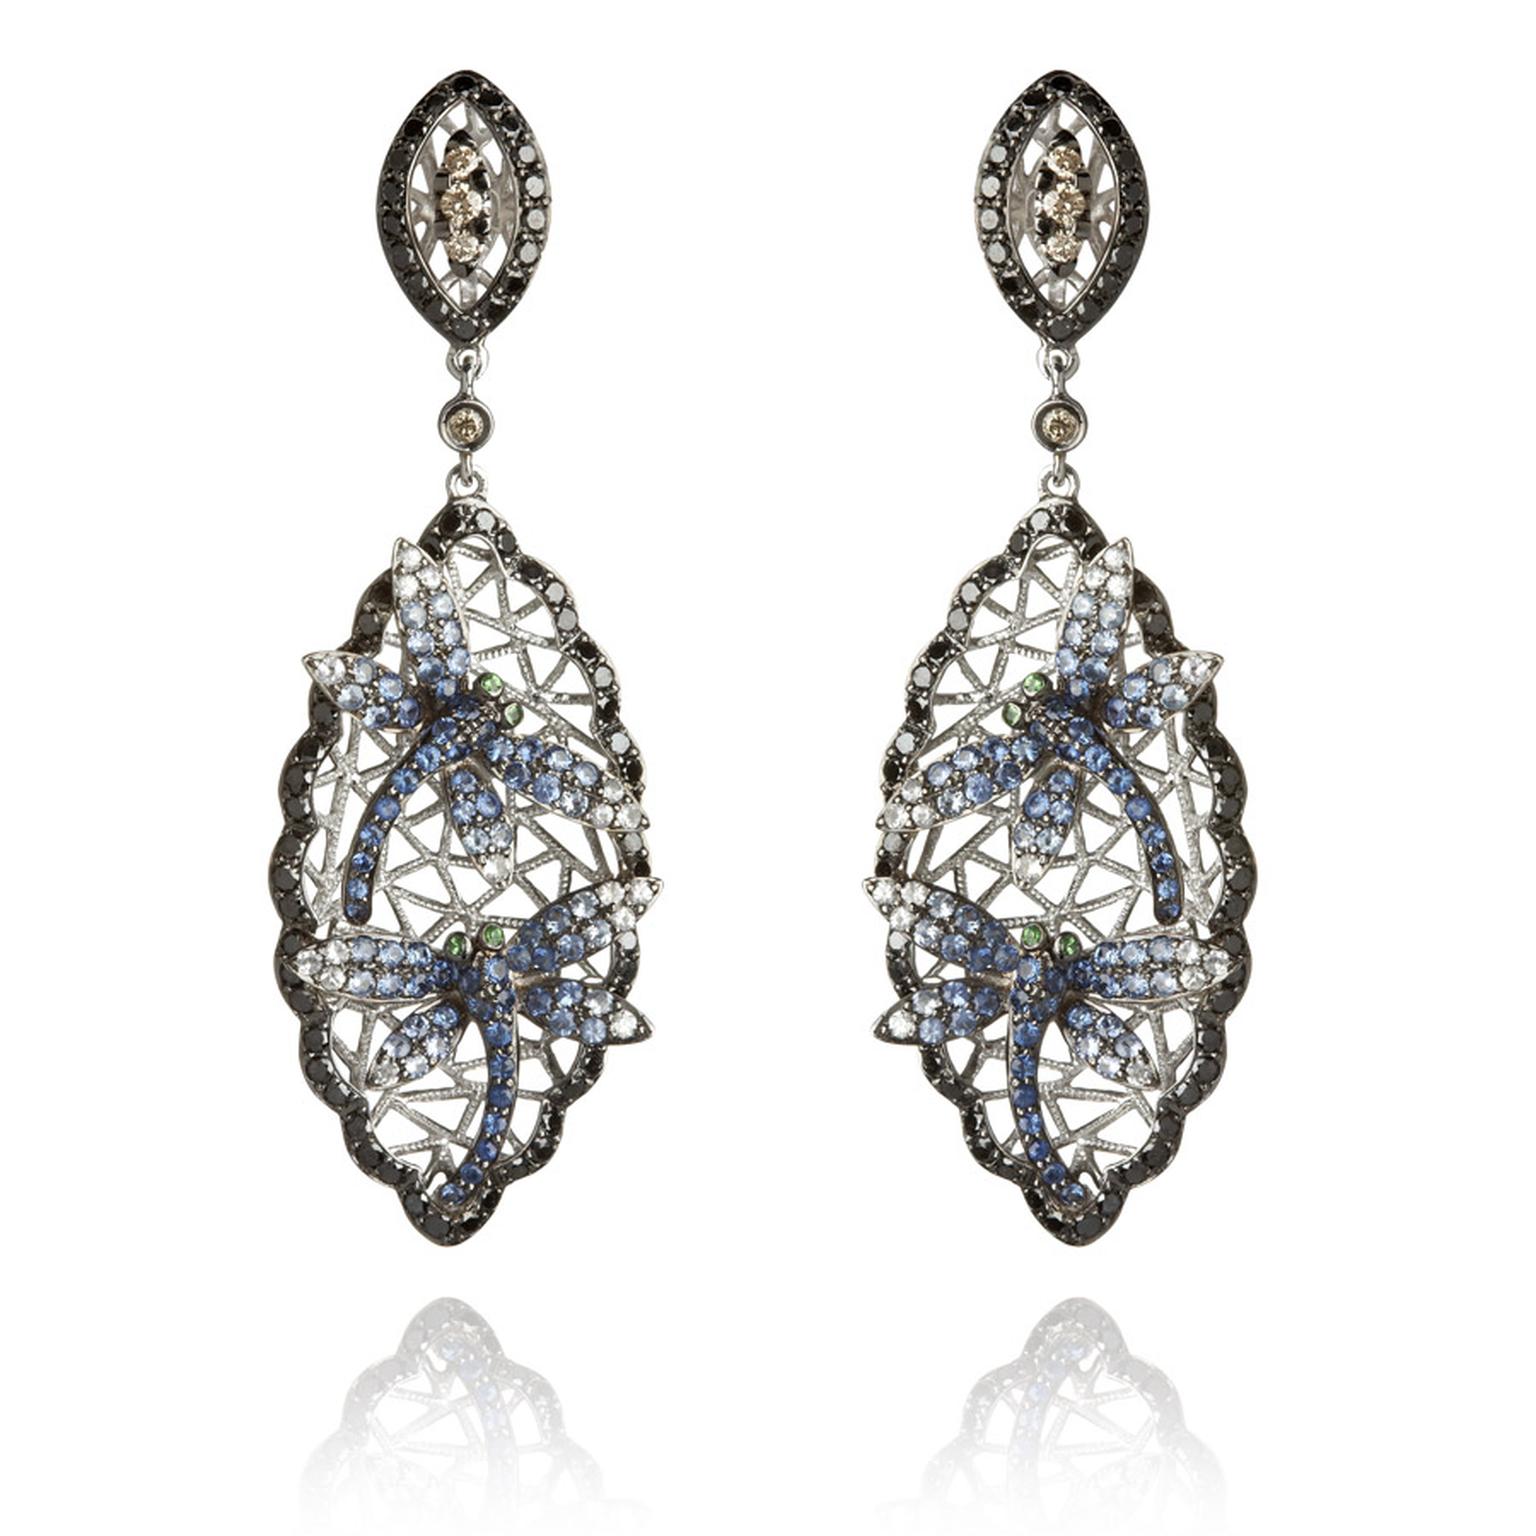 Wendy-Yue-Fantasie-18ct-white-gold,--diamond,-sapphire-and-garnet-Diving-Dragonfly-earrings-By-Wendy-Yue-for--Annoushka.jpg